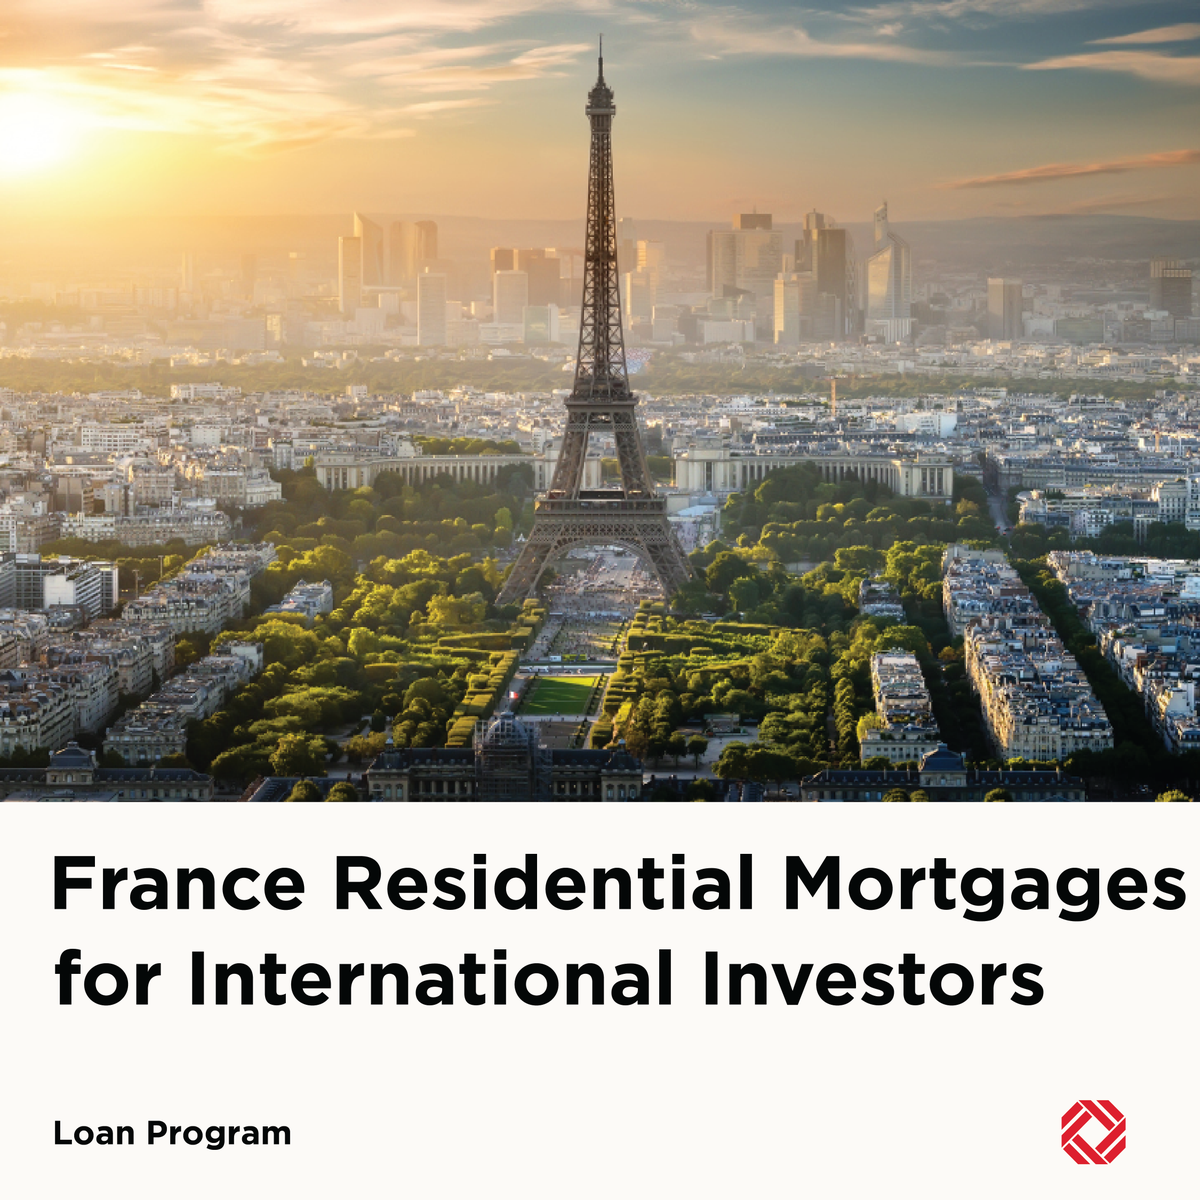 🇫🇷 Discover your dream home in France! From beaches to Bordeaux, we've got it all covered. Find your perfect place with GMG Asia. 🏠🌞🍷

hello@gmg.asia

#FrenchRealEstate #InvestInFrance #DreamHome #InternationalInvestors #MortgageSpecialists #frenchriveria #france #cotedazur